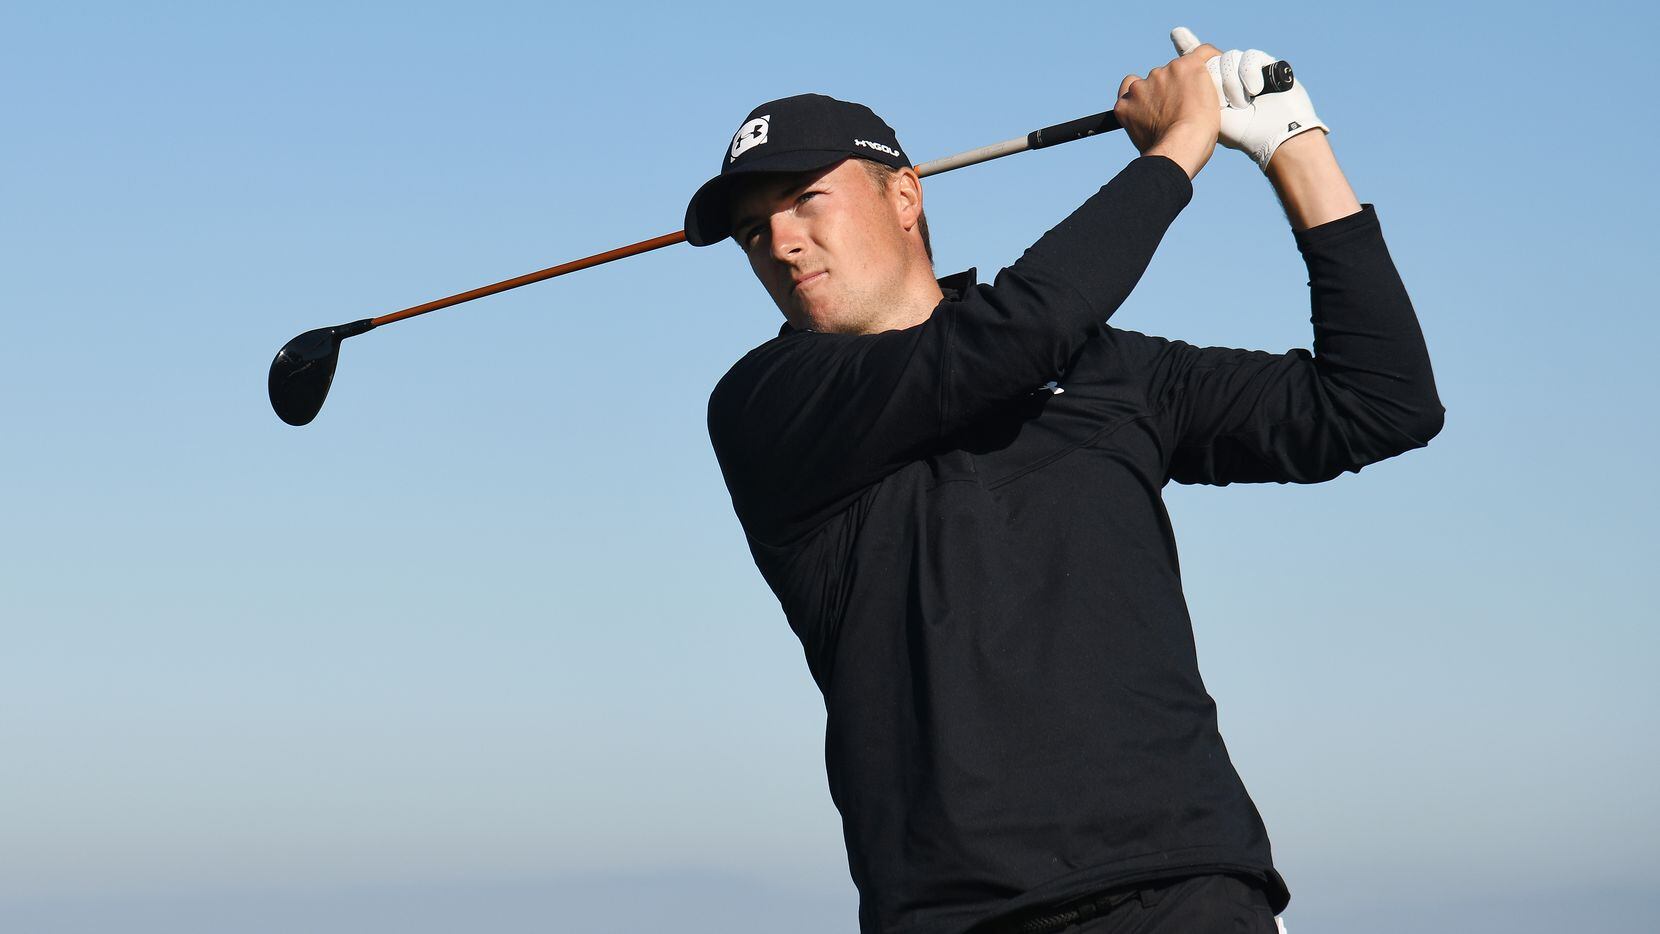 PEBBLE BEACH, CALIFORNIA - FEBRUARY 07:  Jordan Spieth of the United States plays his shot from the 13th tee during the second round of the AT&T Pebble Beach Pro-Am at Monterey Peninsula Country Club on February 07, 2020 in Pebble Beach, California.